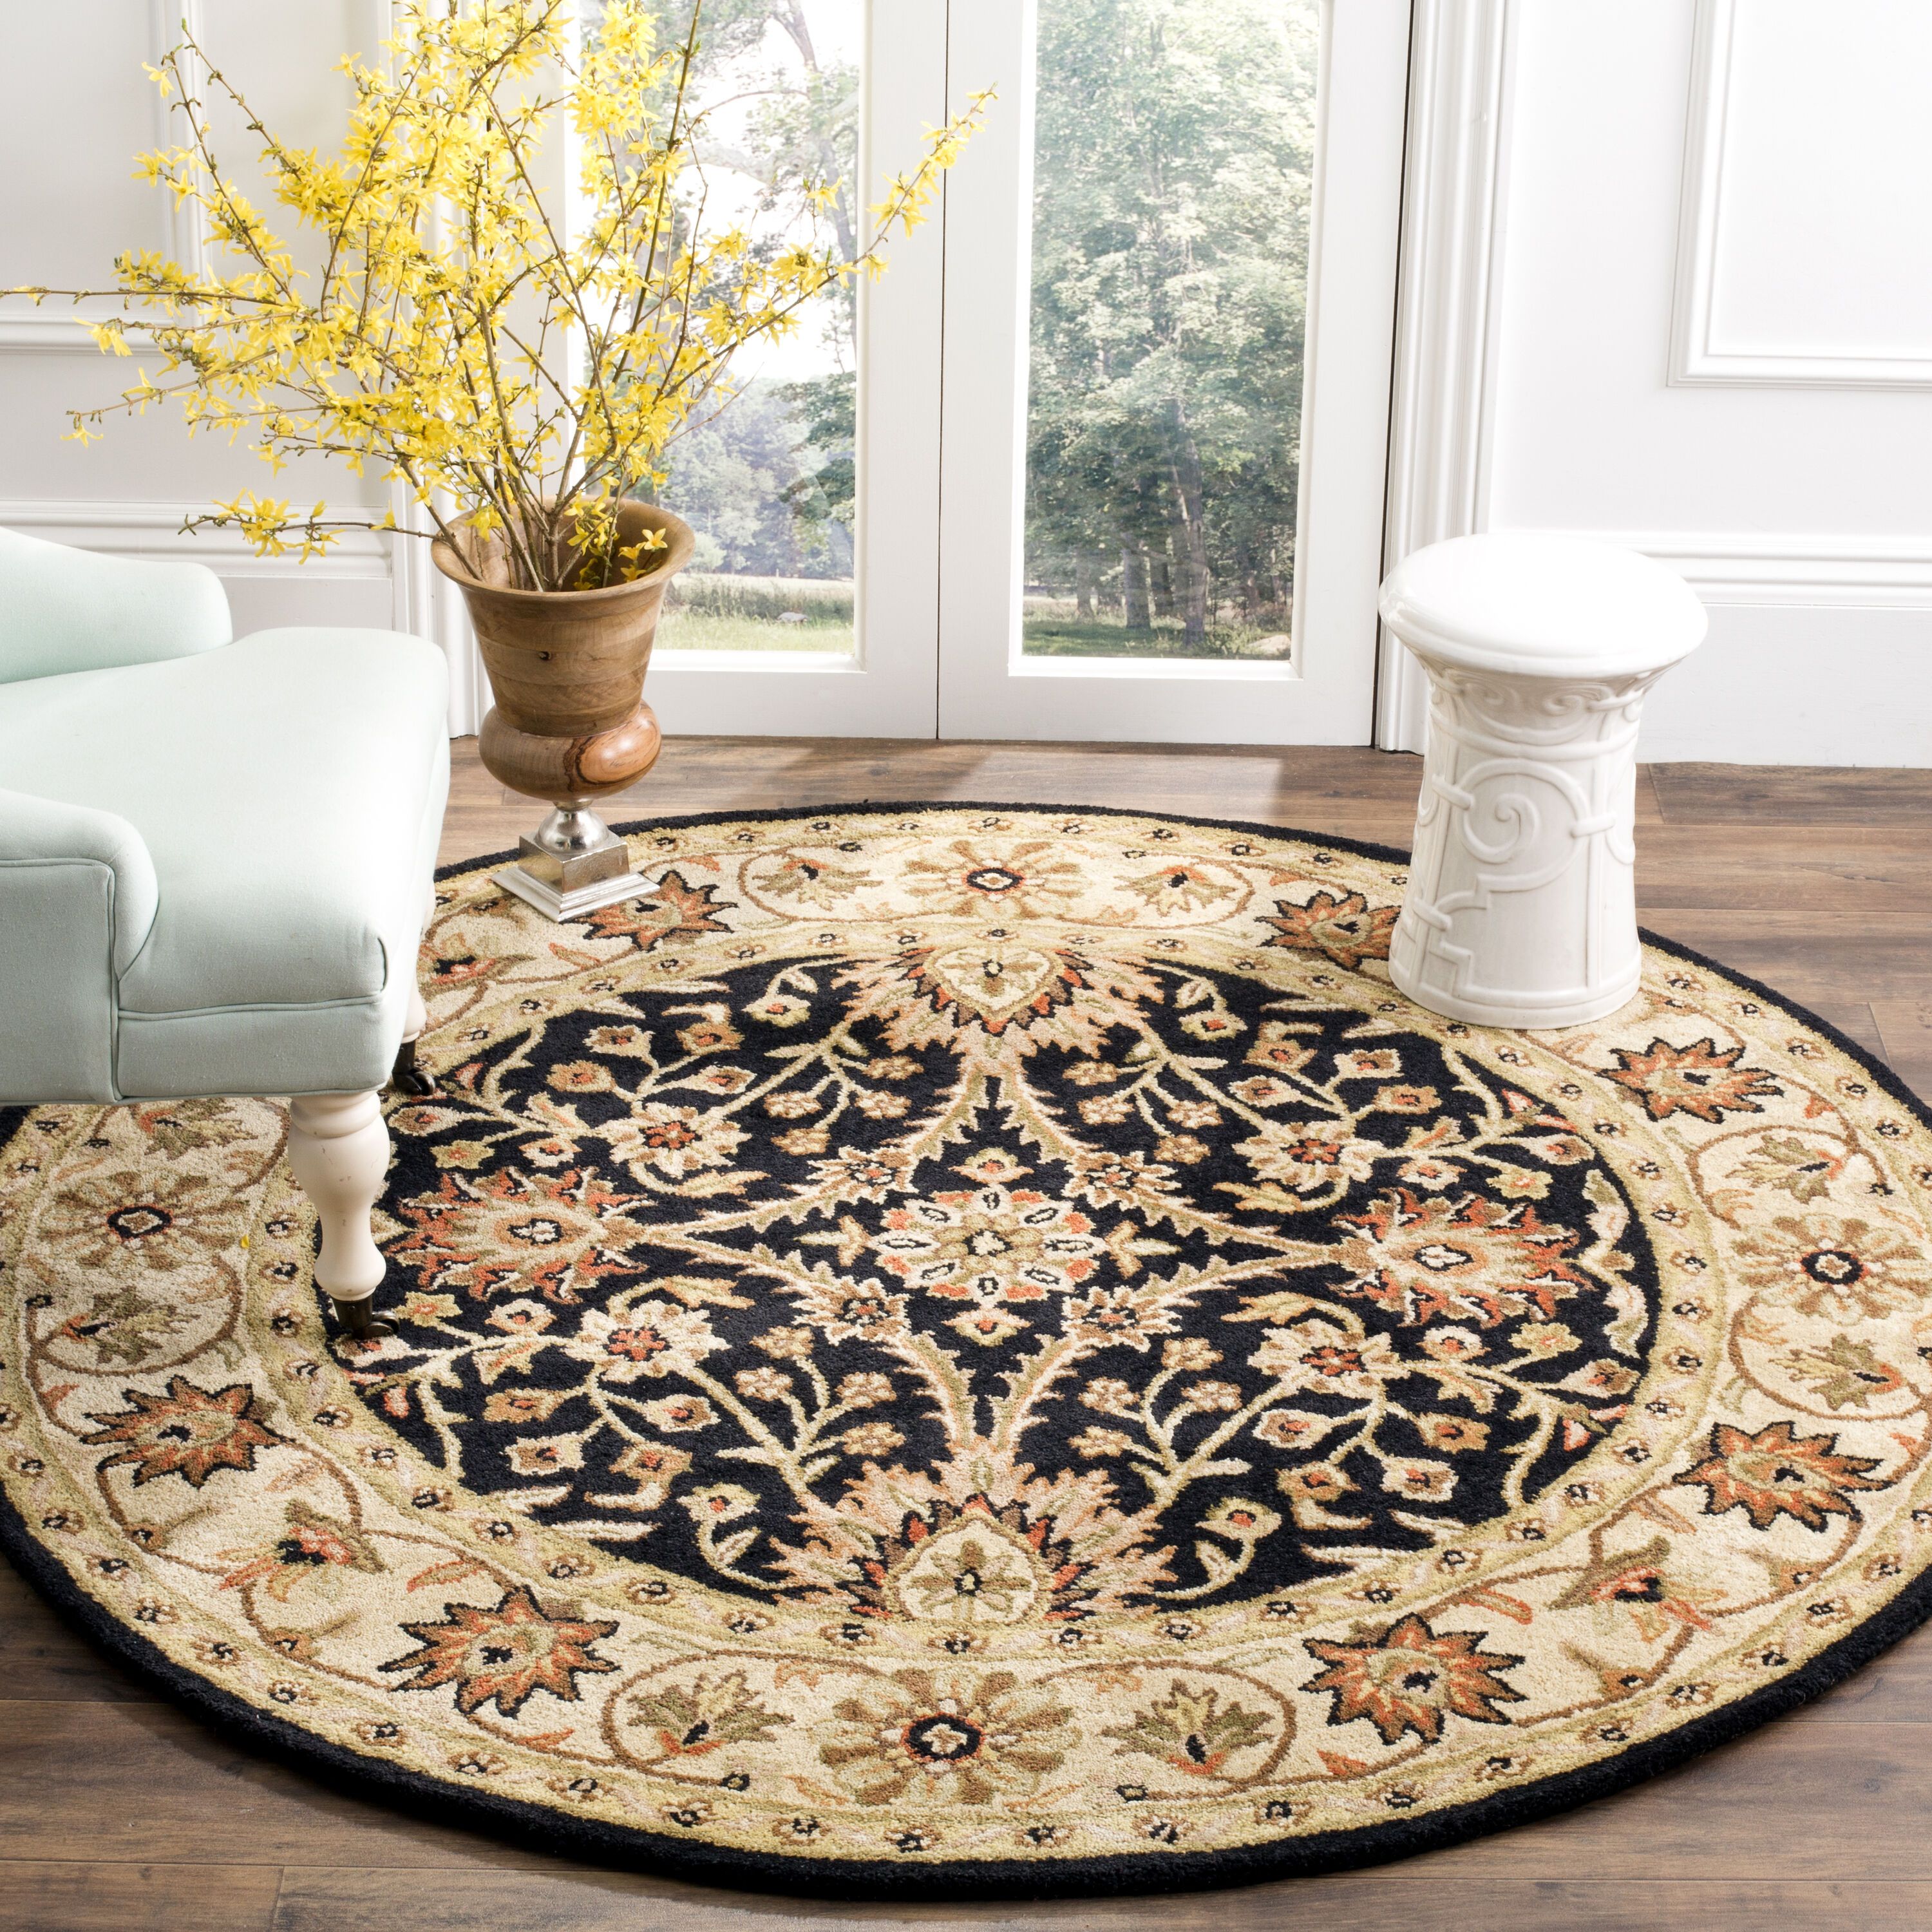 Safavieh 5 X 7 Wool Black Oval Indoor Floral/botanical Vintage Area Rug In  The Rugs Department At Lowes Throughout Botanical Oval Rugs (View 5 of 15)